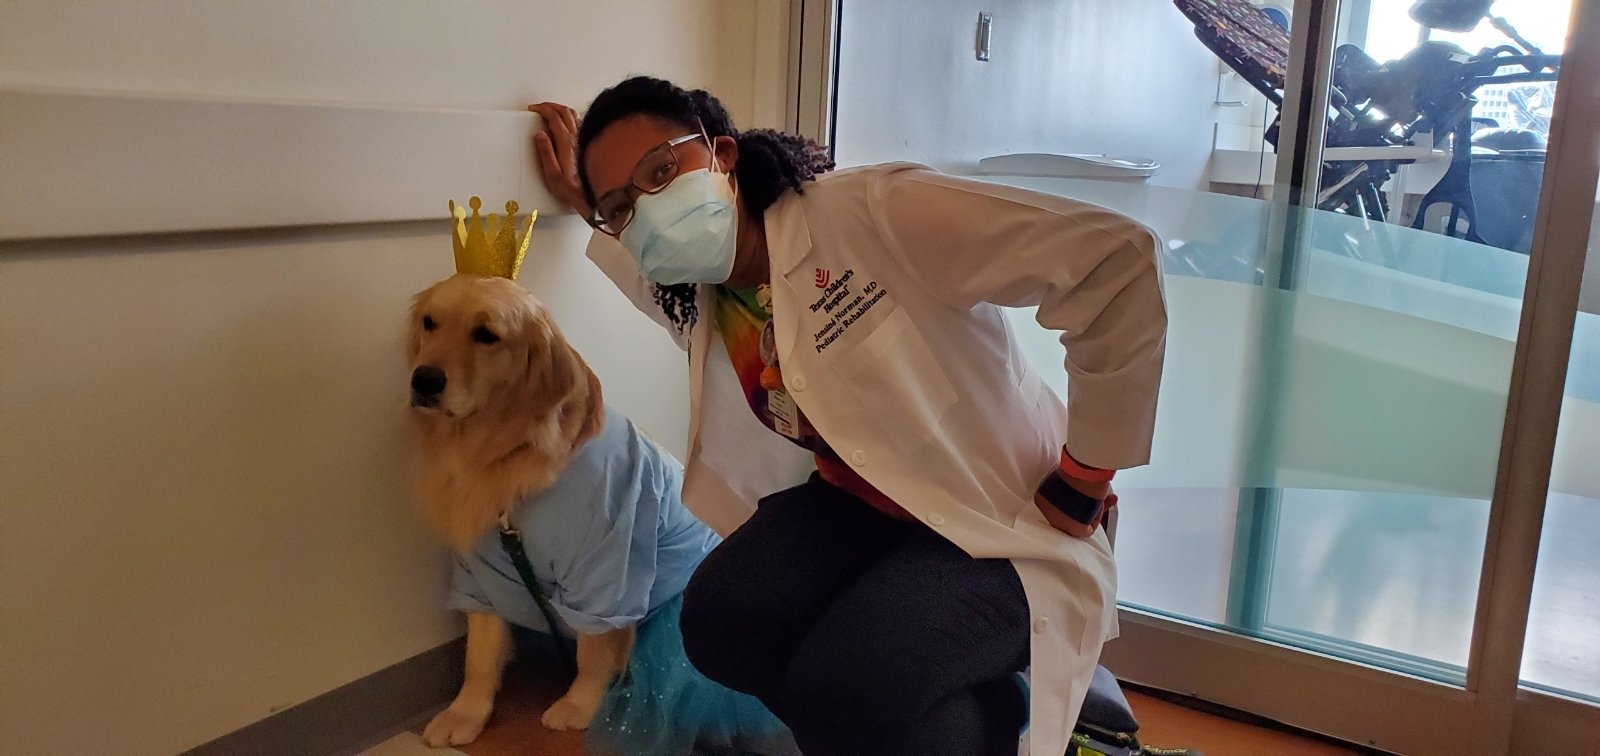 Pediatric Rehabilitation Fellow Jensine’ J. Norman, MD, posing with a therapy dog.